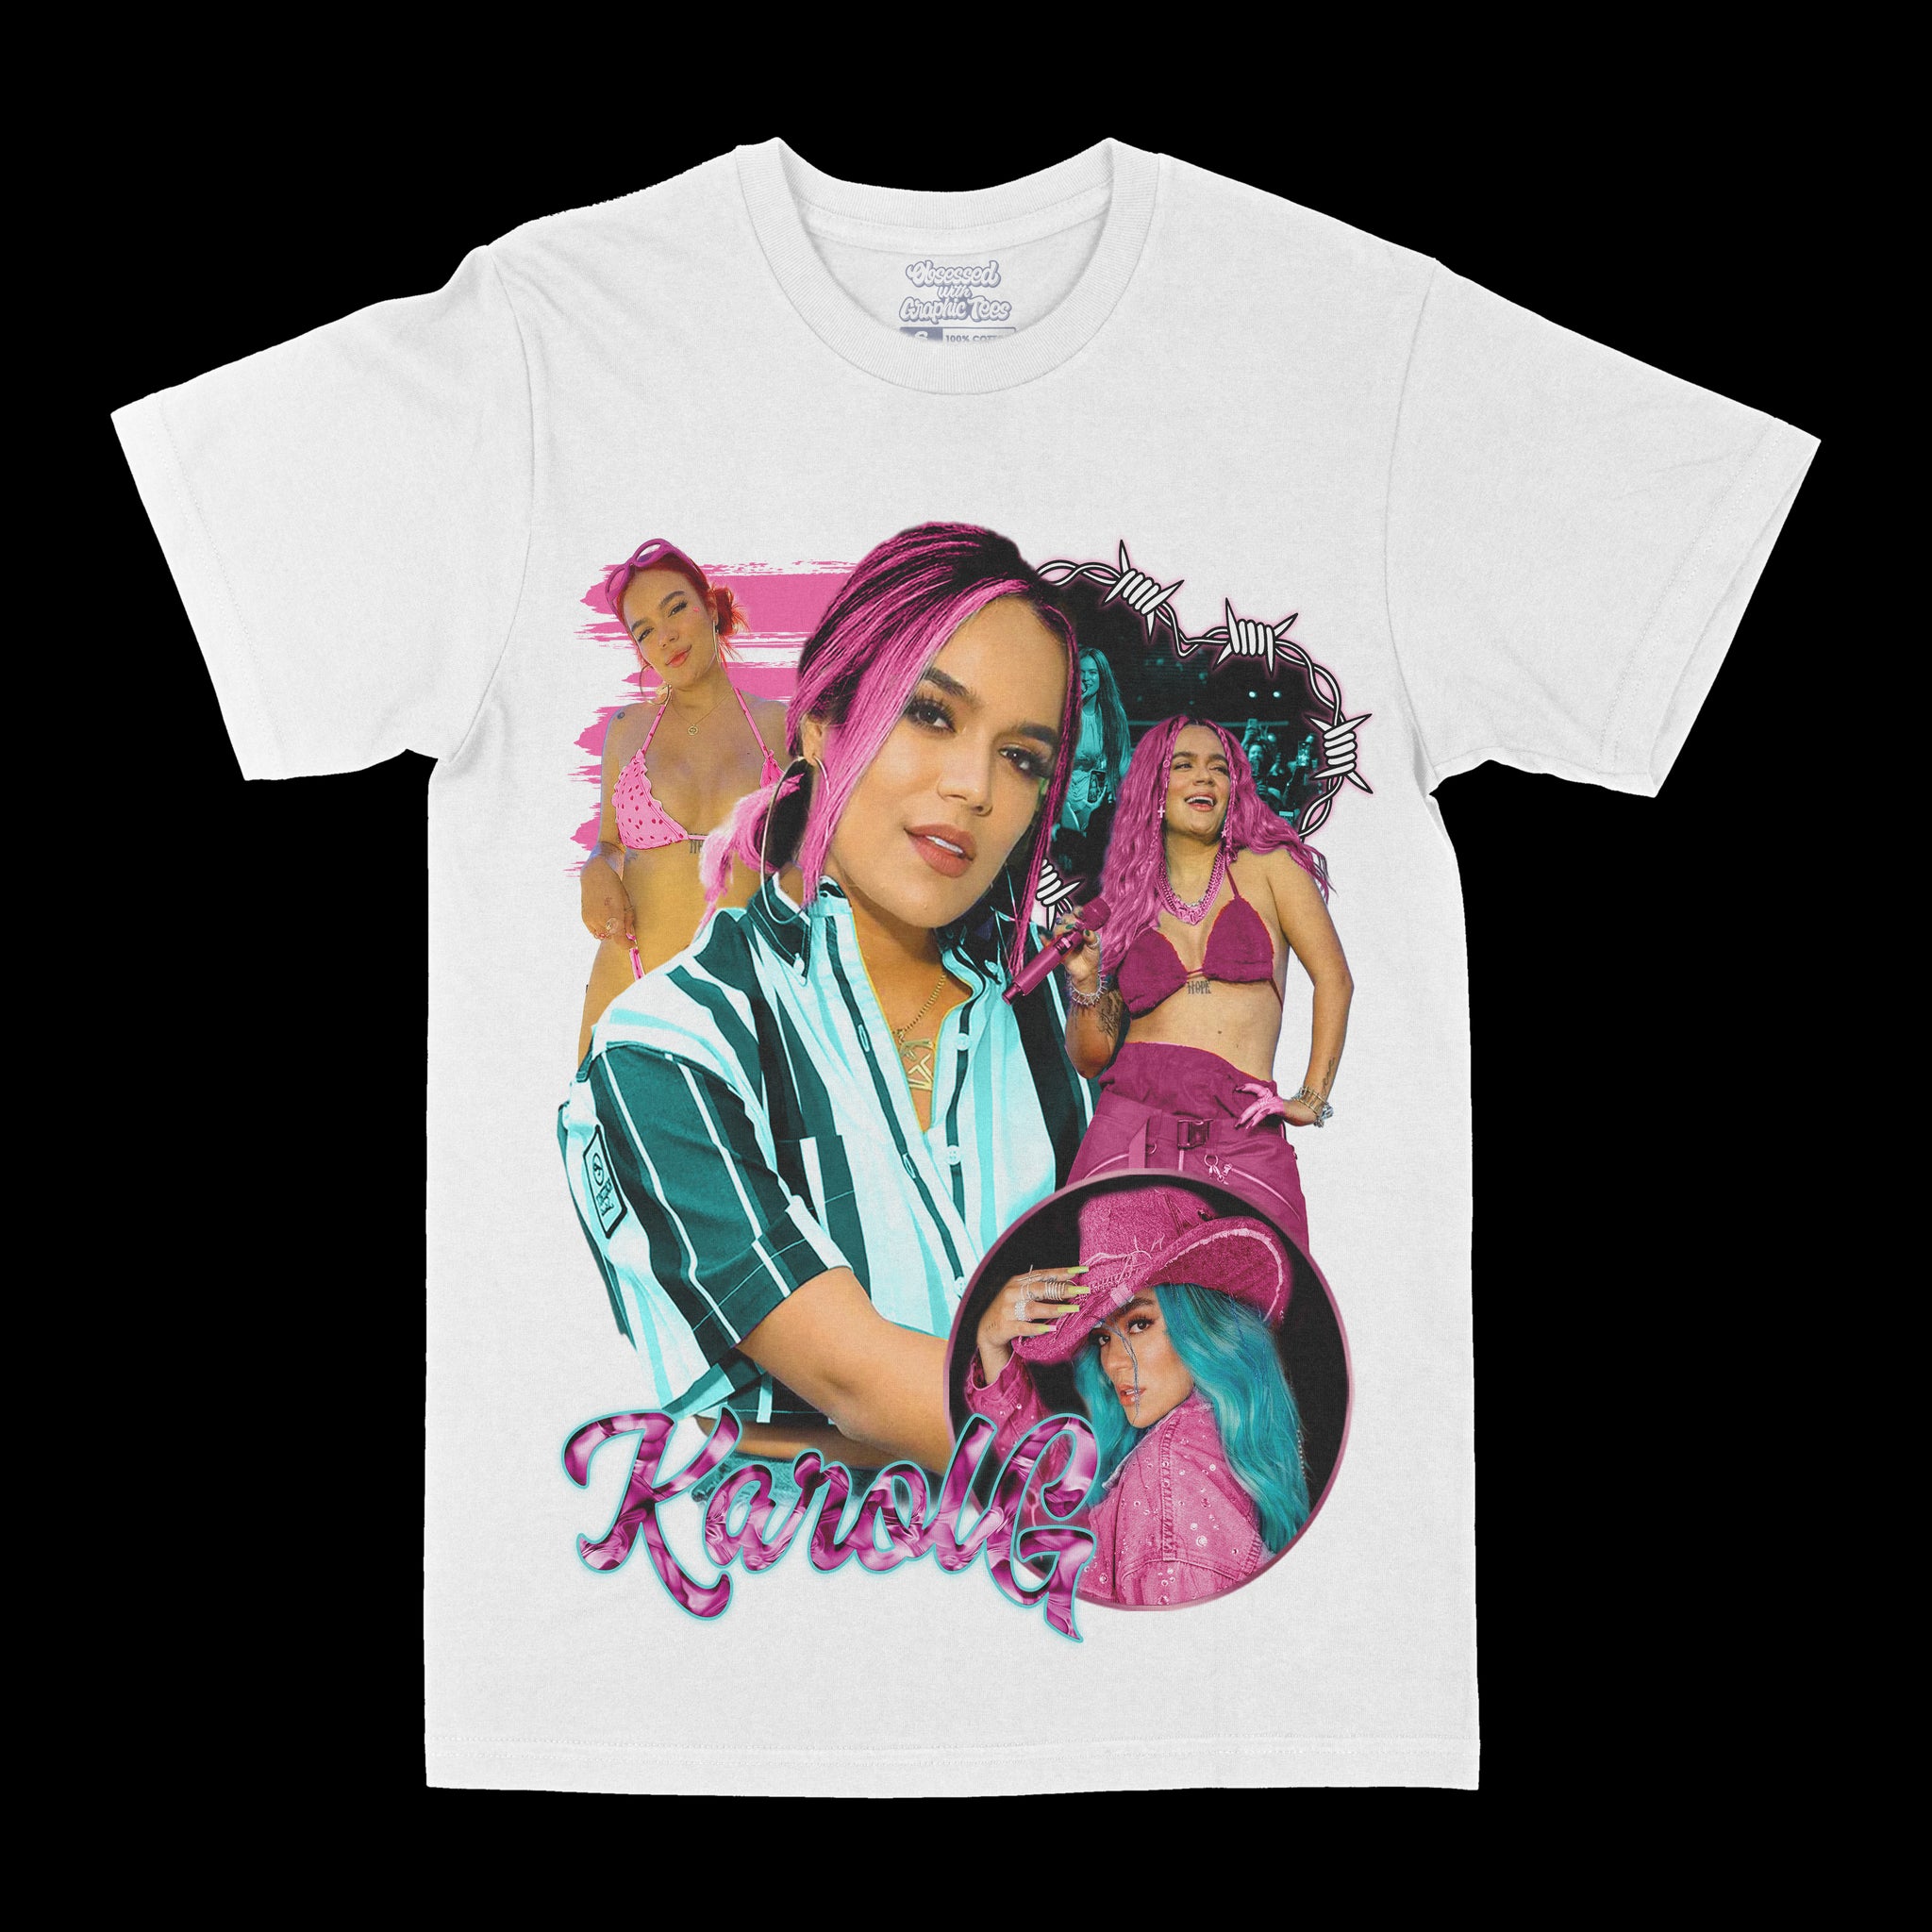 Graphic Tee Apparel - Pop Culture Apparel - T-Shirts - Hoodies & More